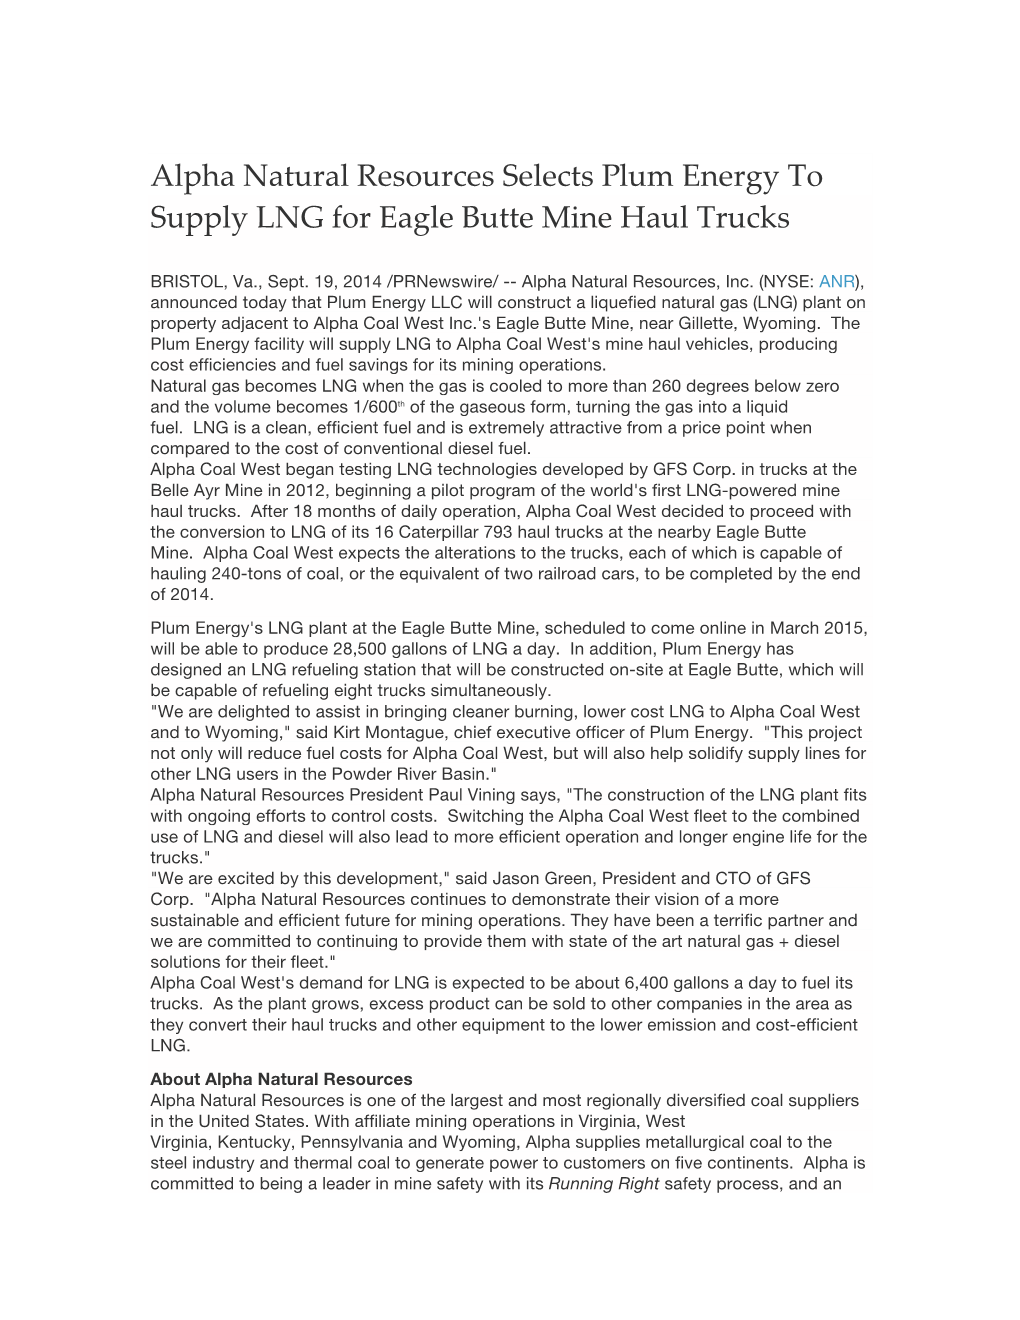 Alpha Natural Resources Selects Plum Energy to Supply LNG for Eagle Butte Mine Haul Trucks